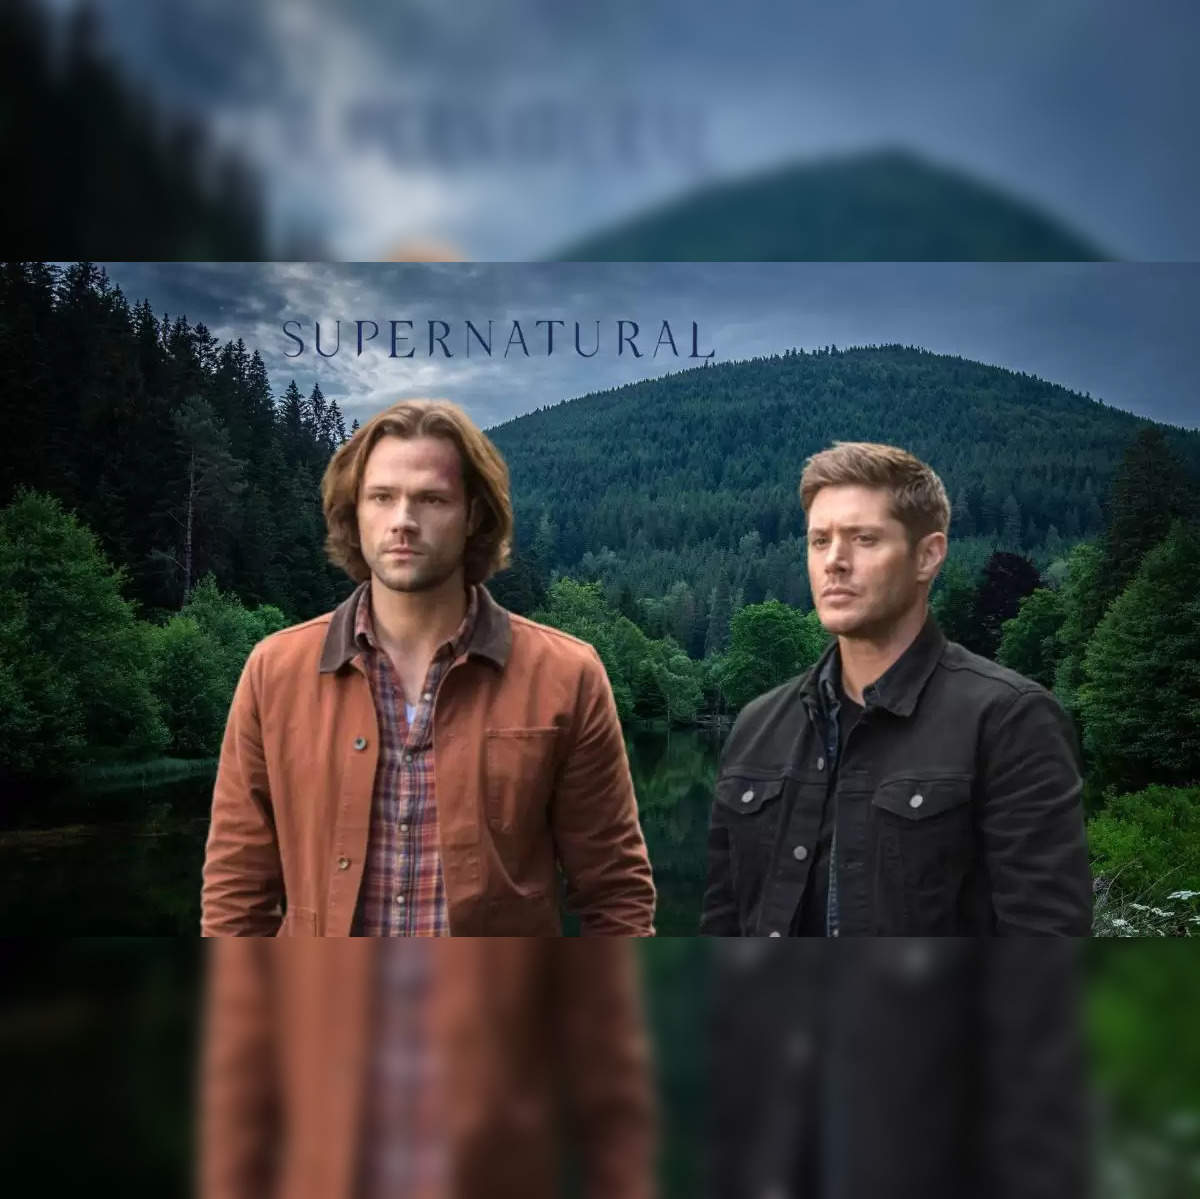 supernatural: Is a 'Supernatural' Season 16 in the cards? The